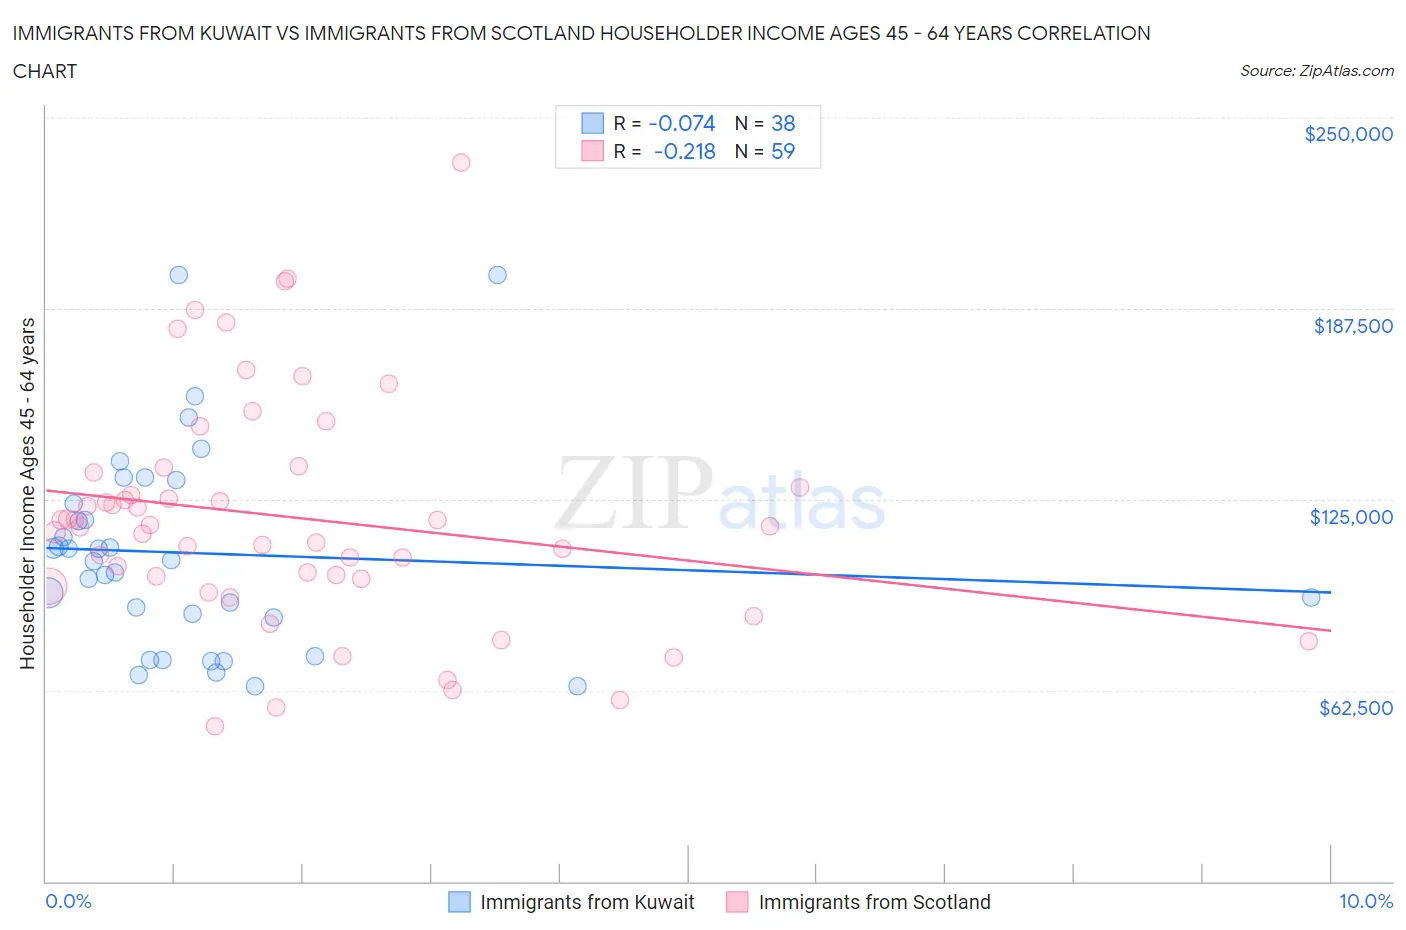 Immigrants from Kuwait vs Immigrants from Scotland Householder Income Ages 45 - 64 years